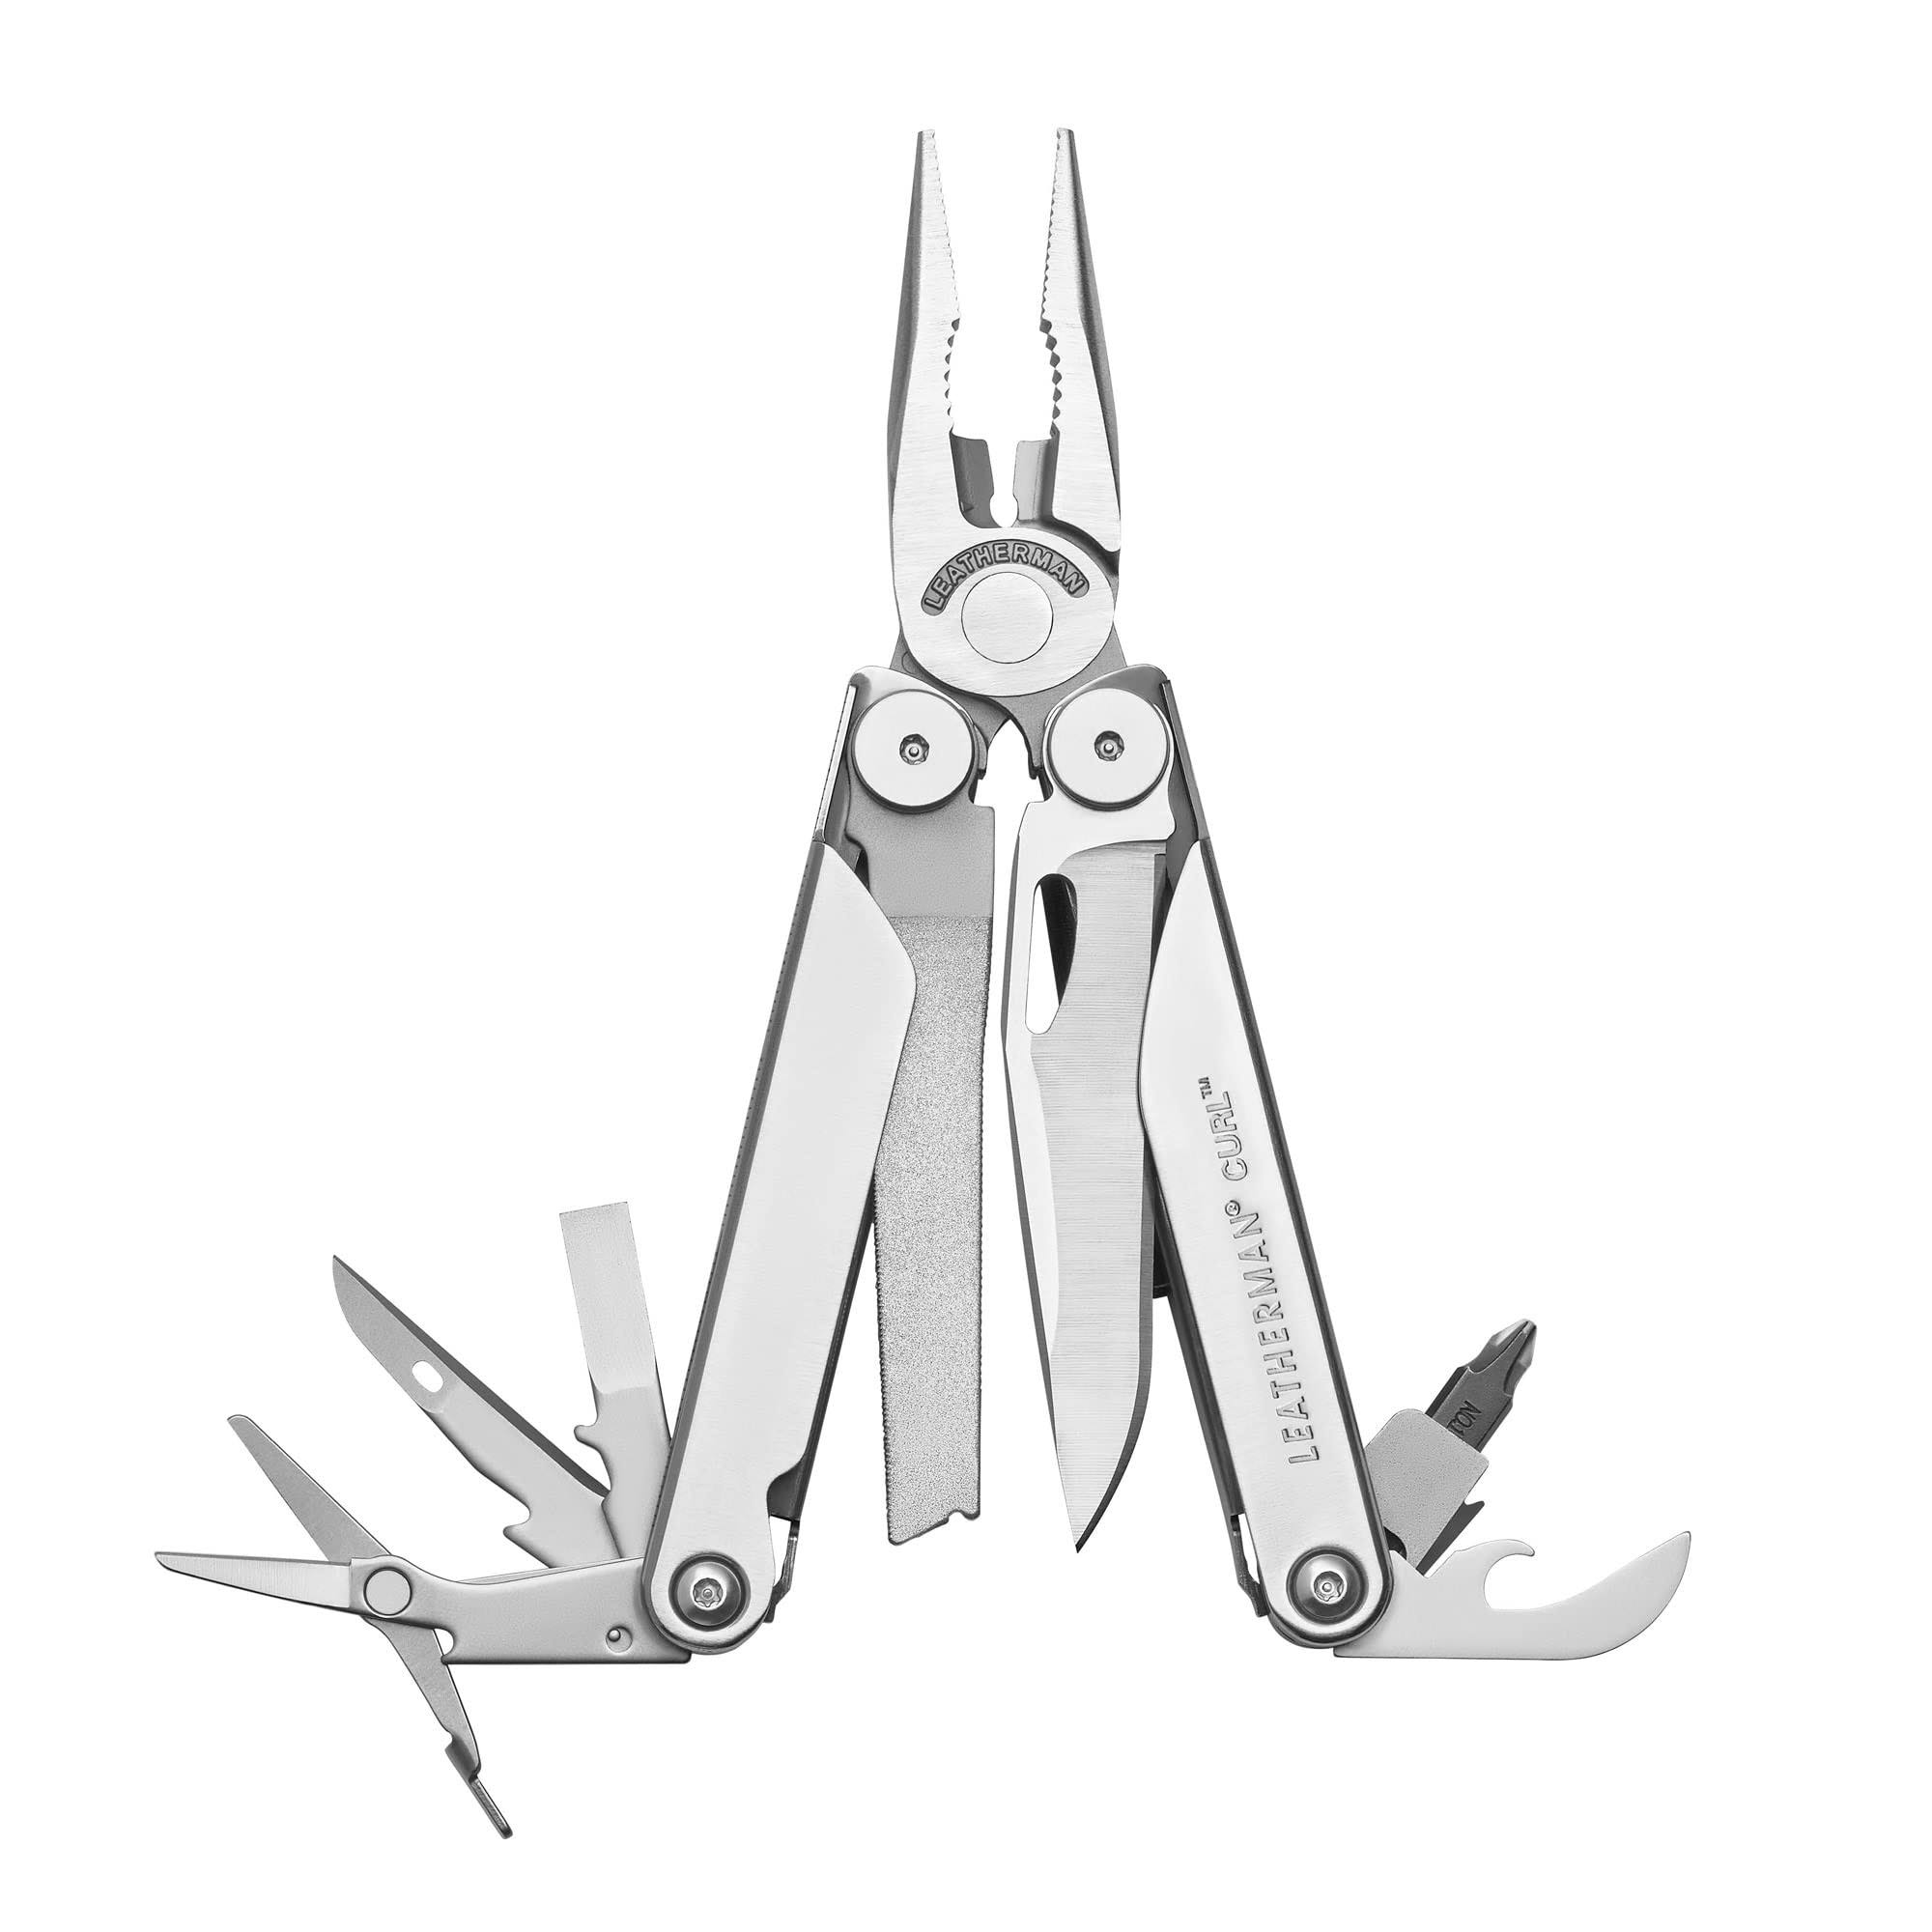 LEATHERMAN, Curl Multitool, Stainless Steel Everyday Tool With Nylon Sheath